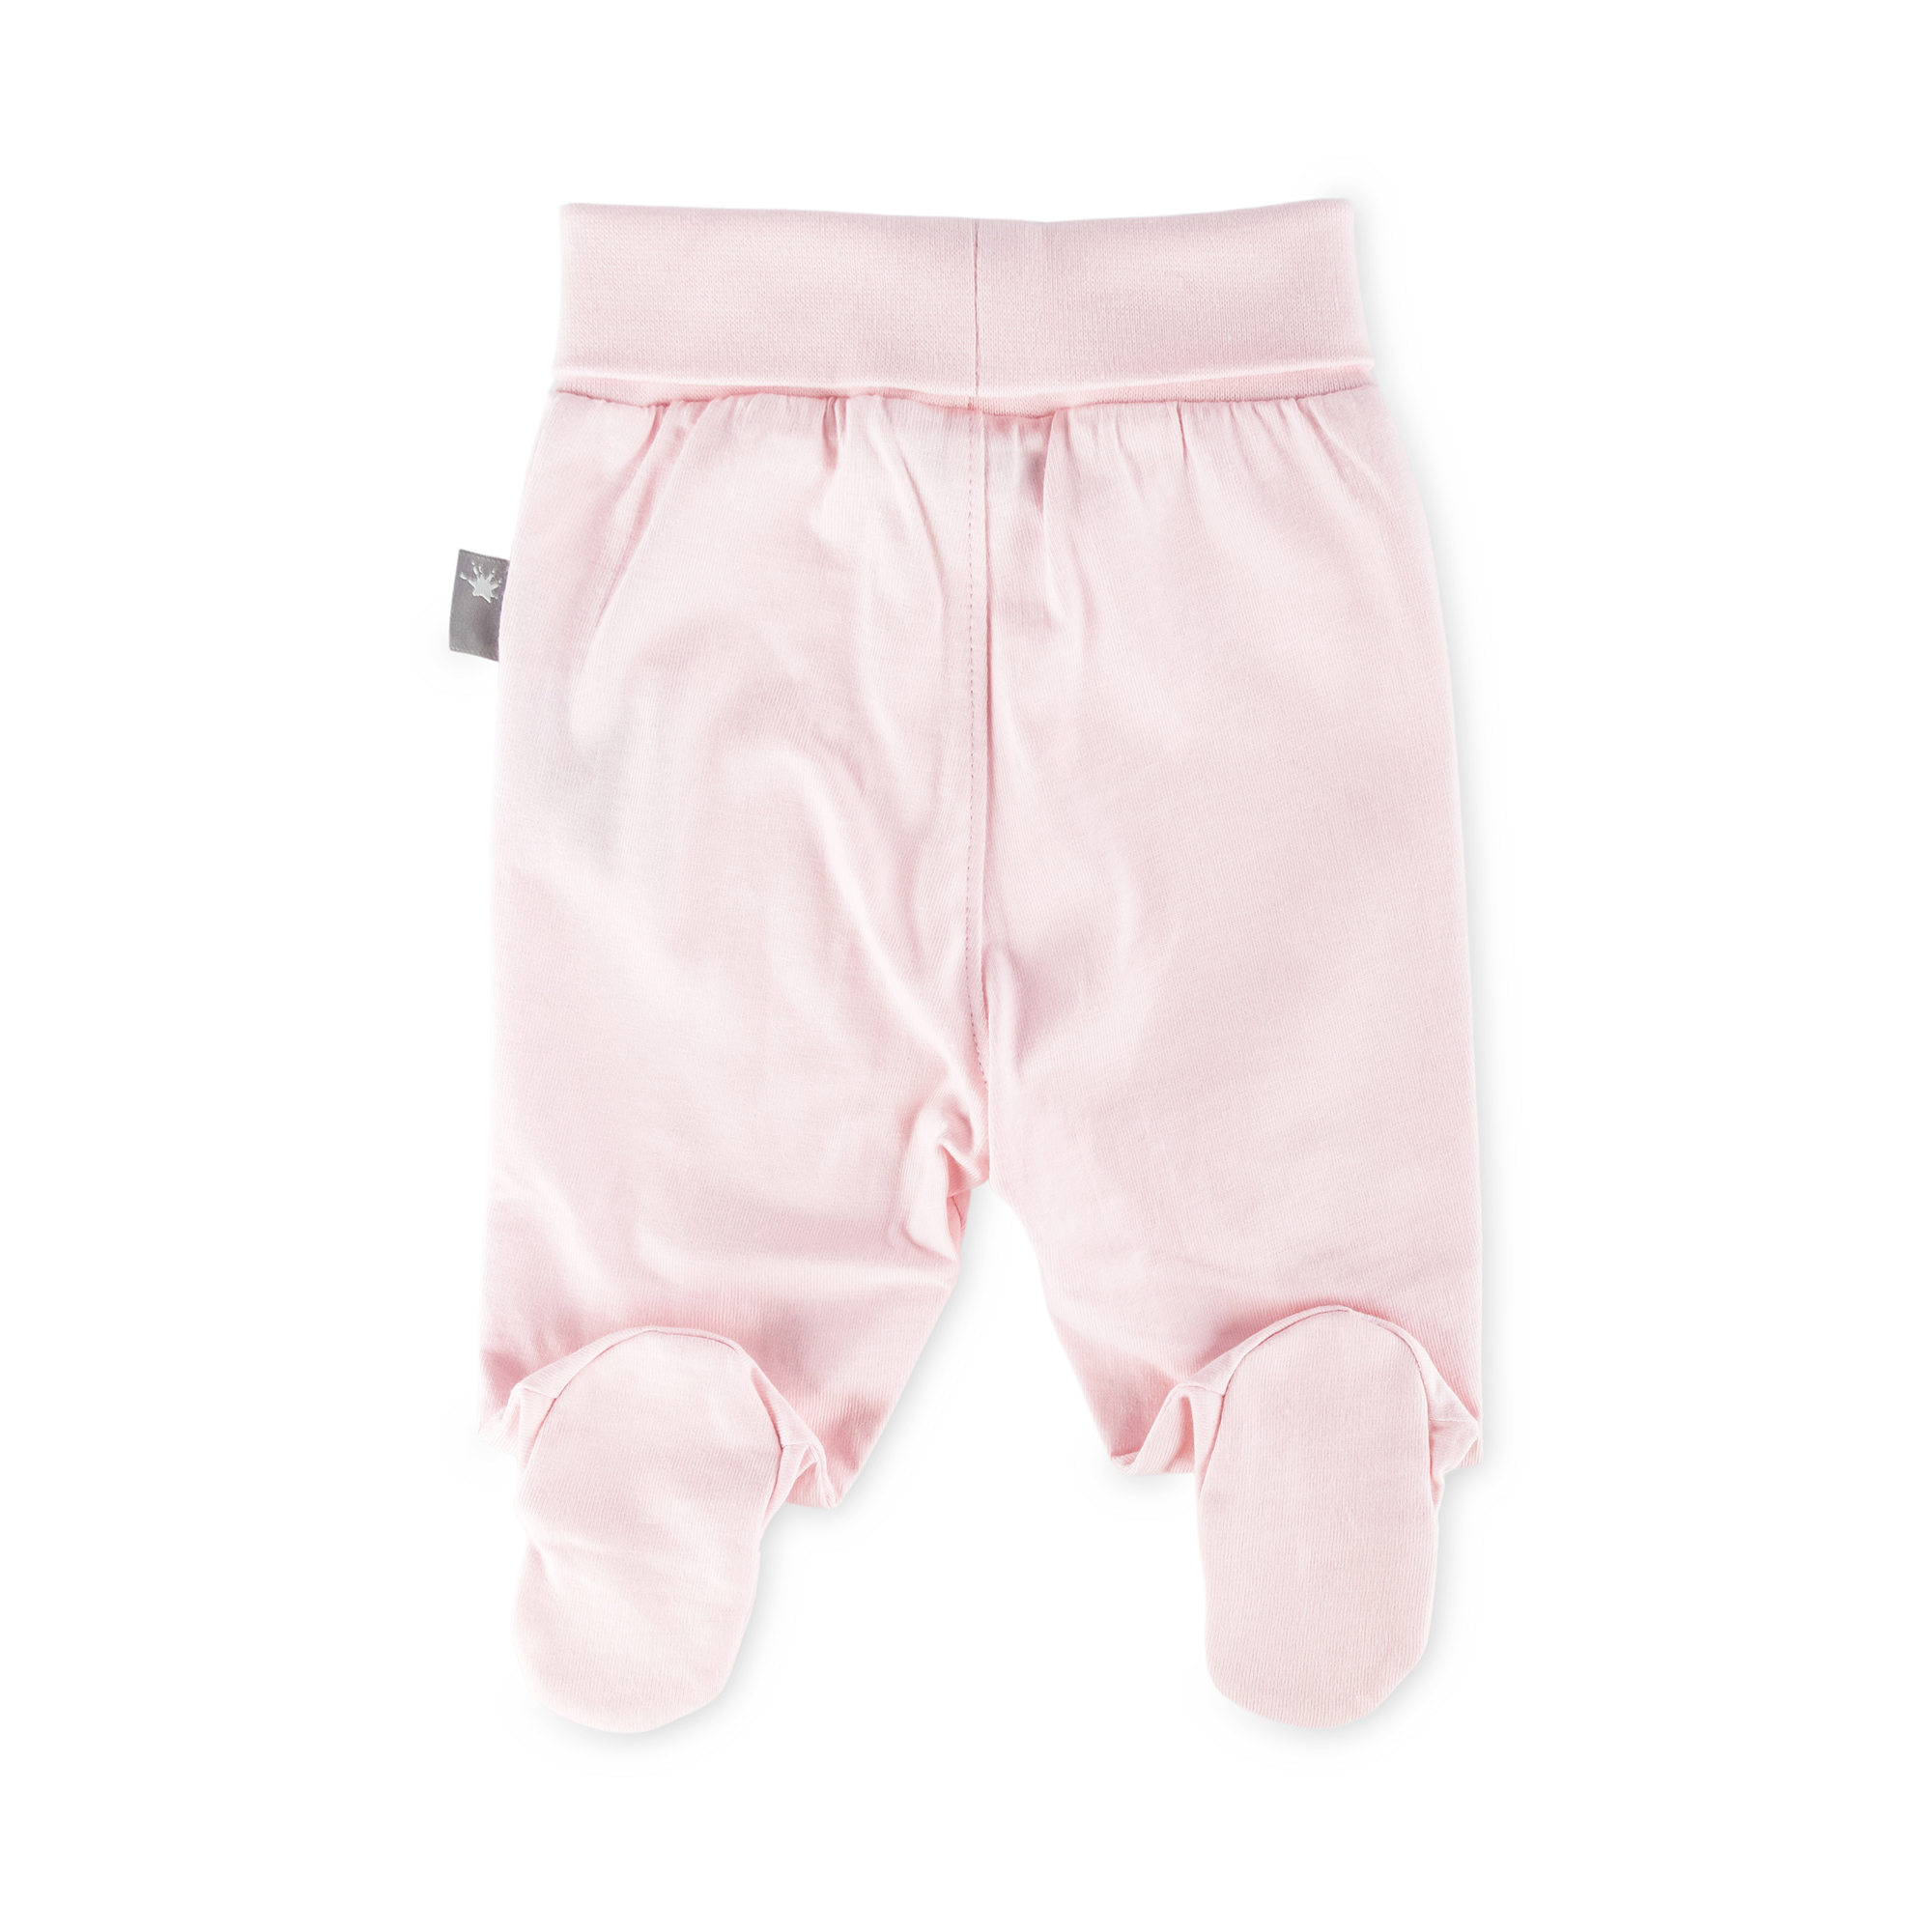 Newborn baby footie pants with bear face feet, pink